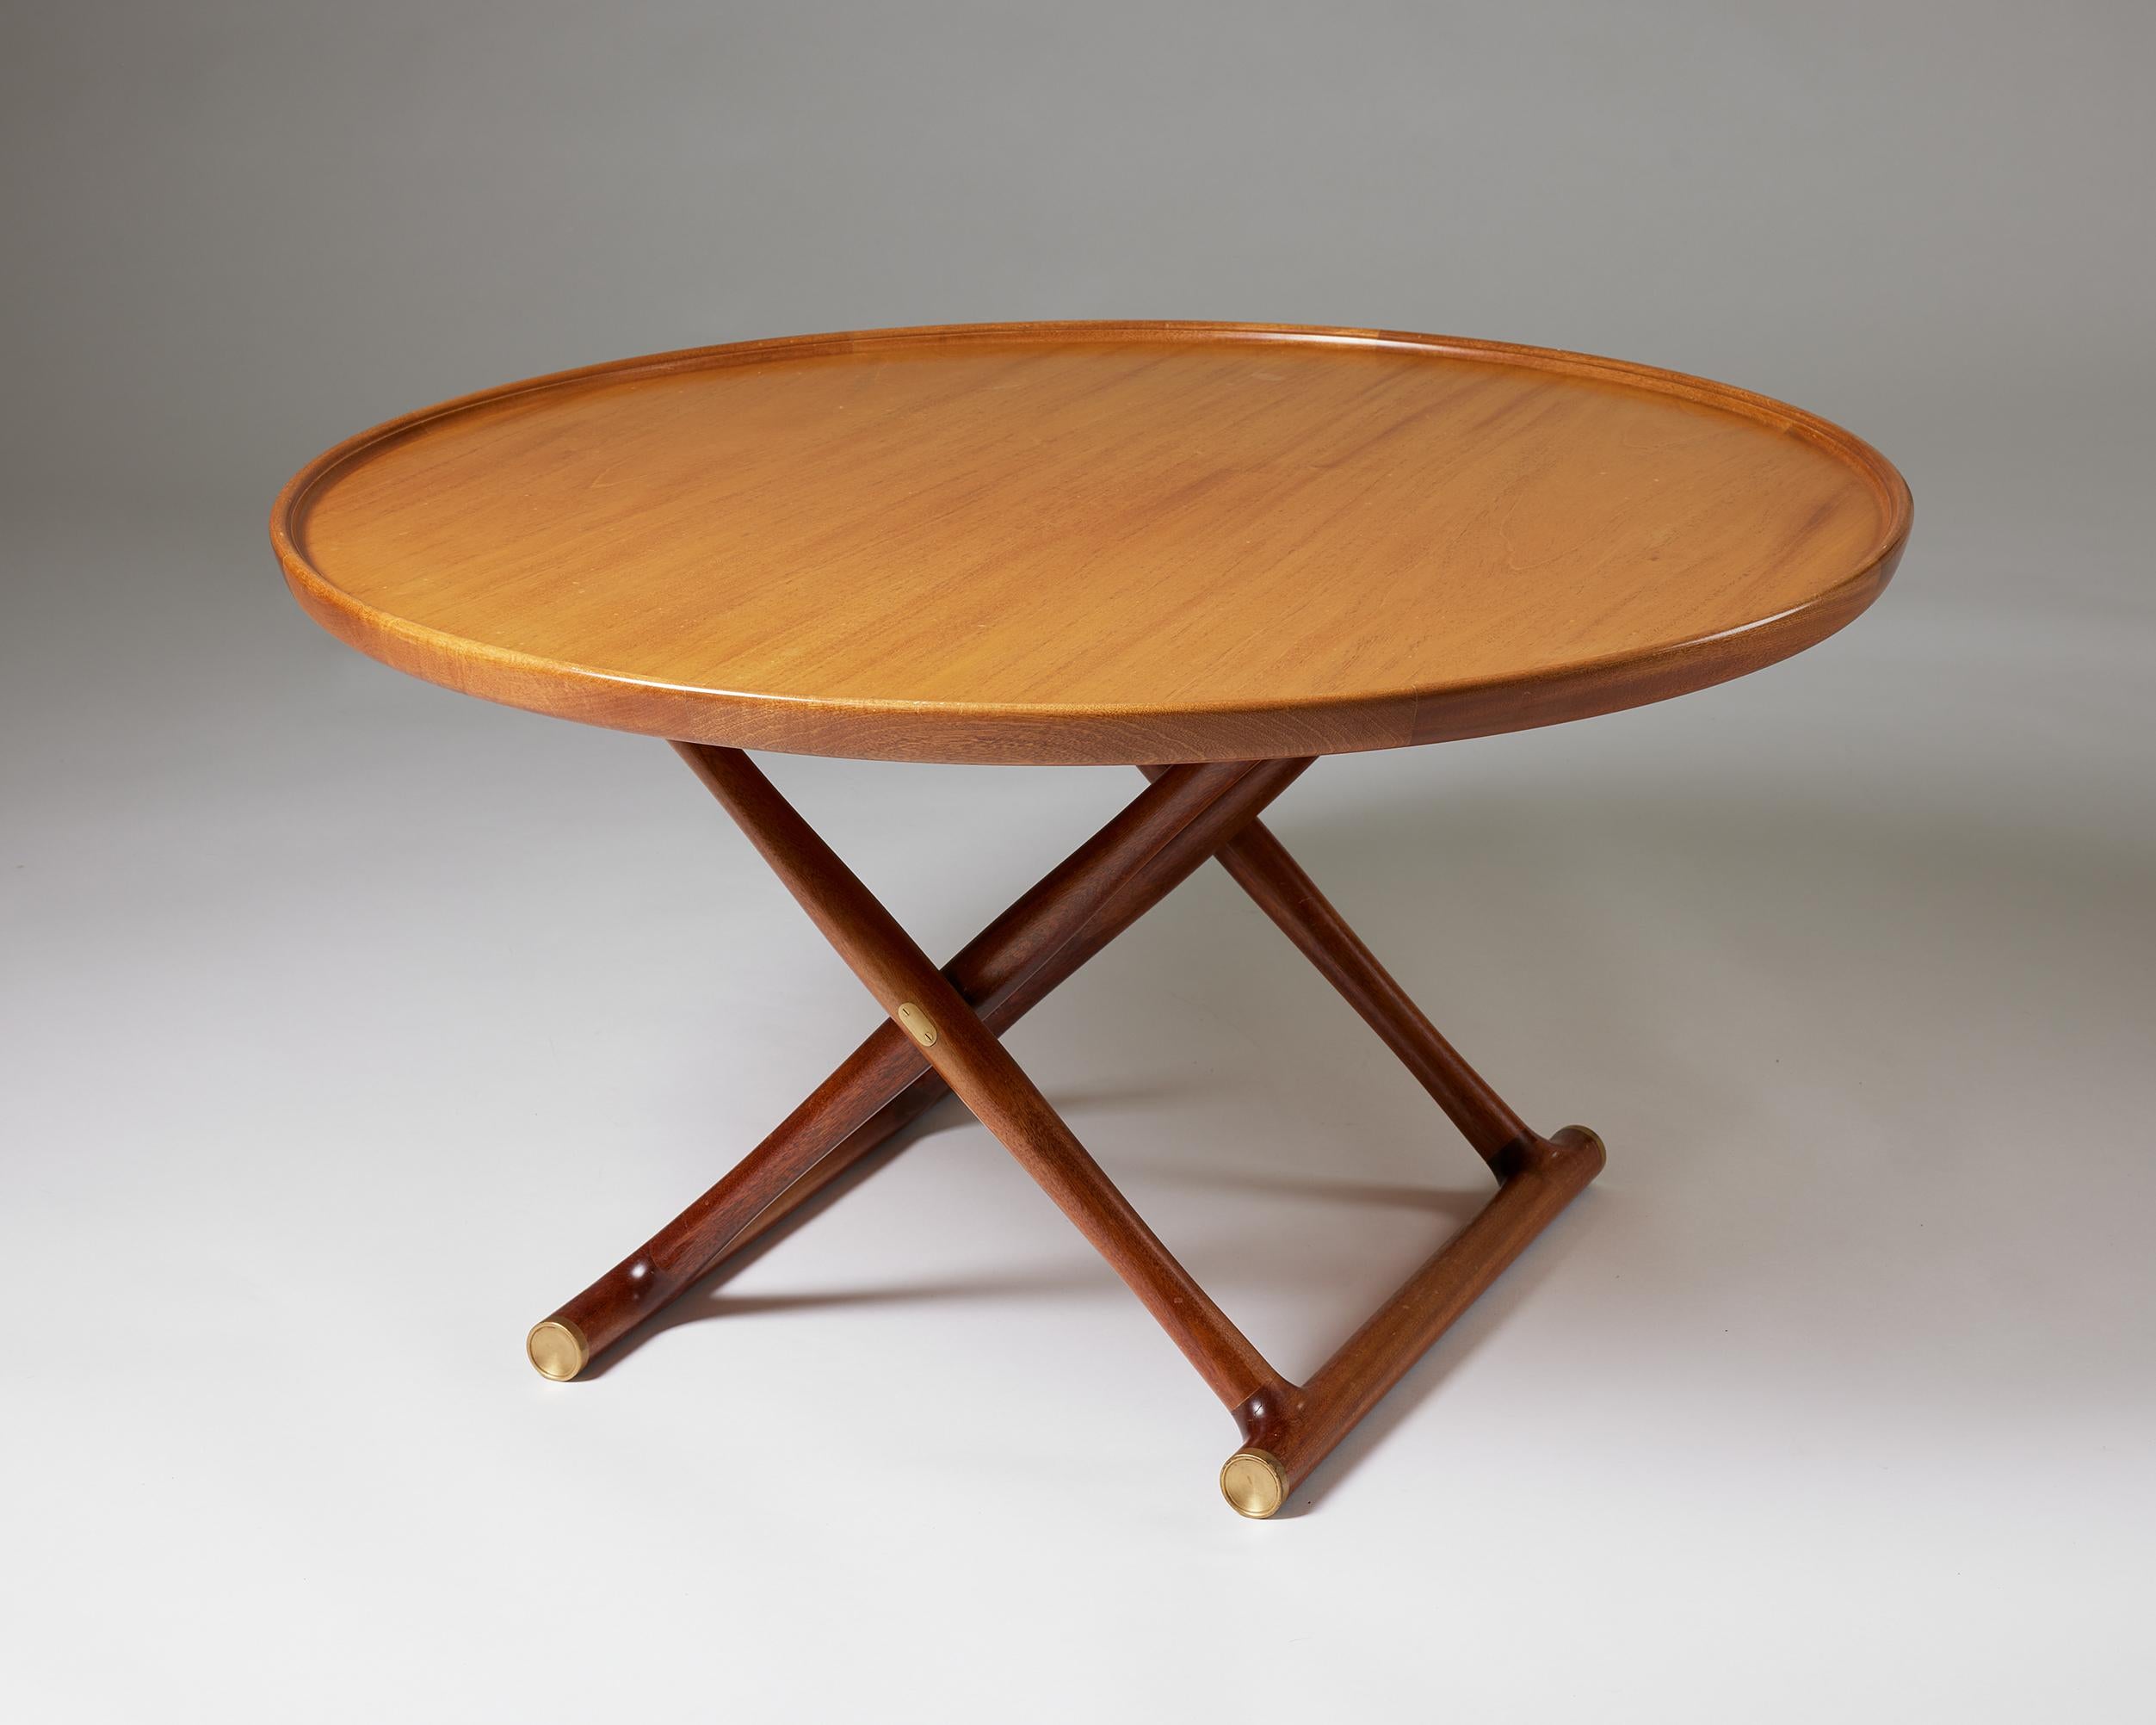 ‘Egyptian Table’ designed by Mogens Lassen for Rud. Rasmussen,
Denmark, 1935.

Mahogany and brass.

A rare larger version of the 'Egyptian Table'.

H: 53 cm / 20 3/4''
D: 100 cm / 3' 3 1/4''.